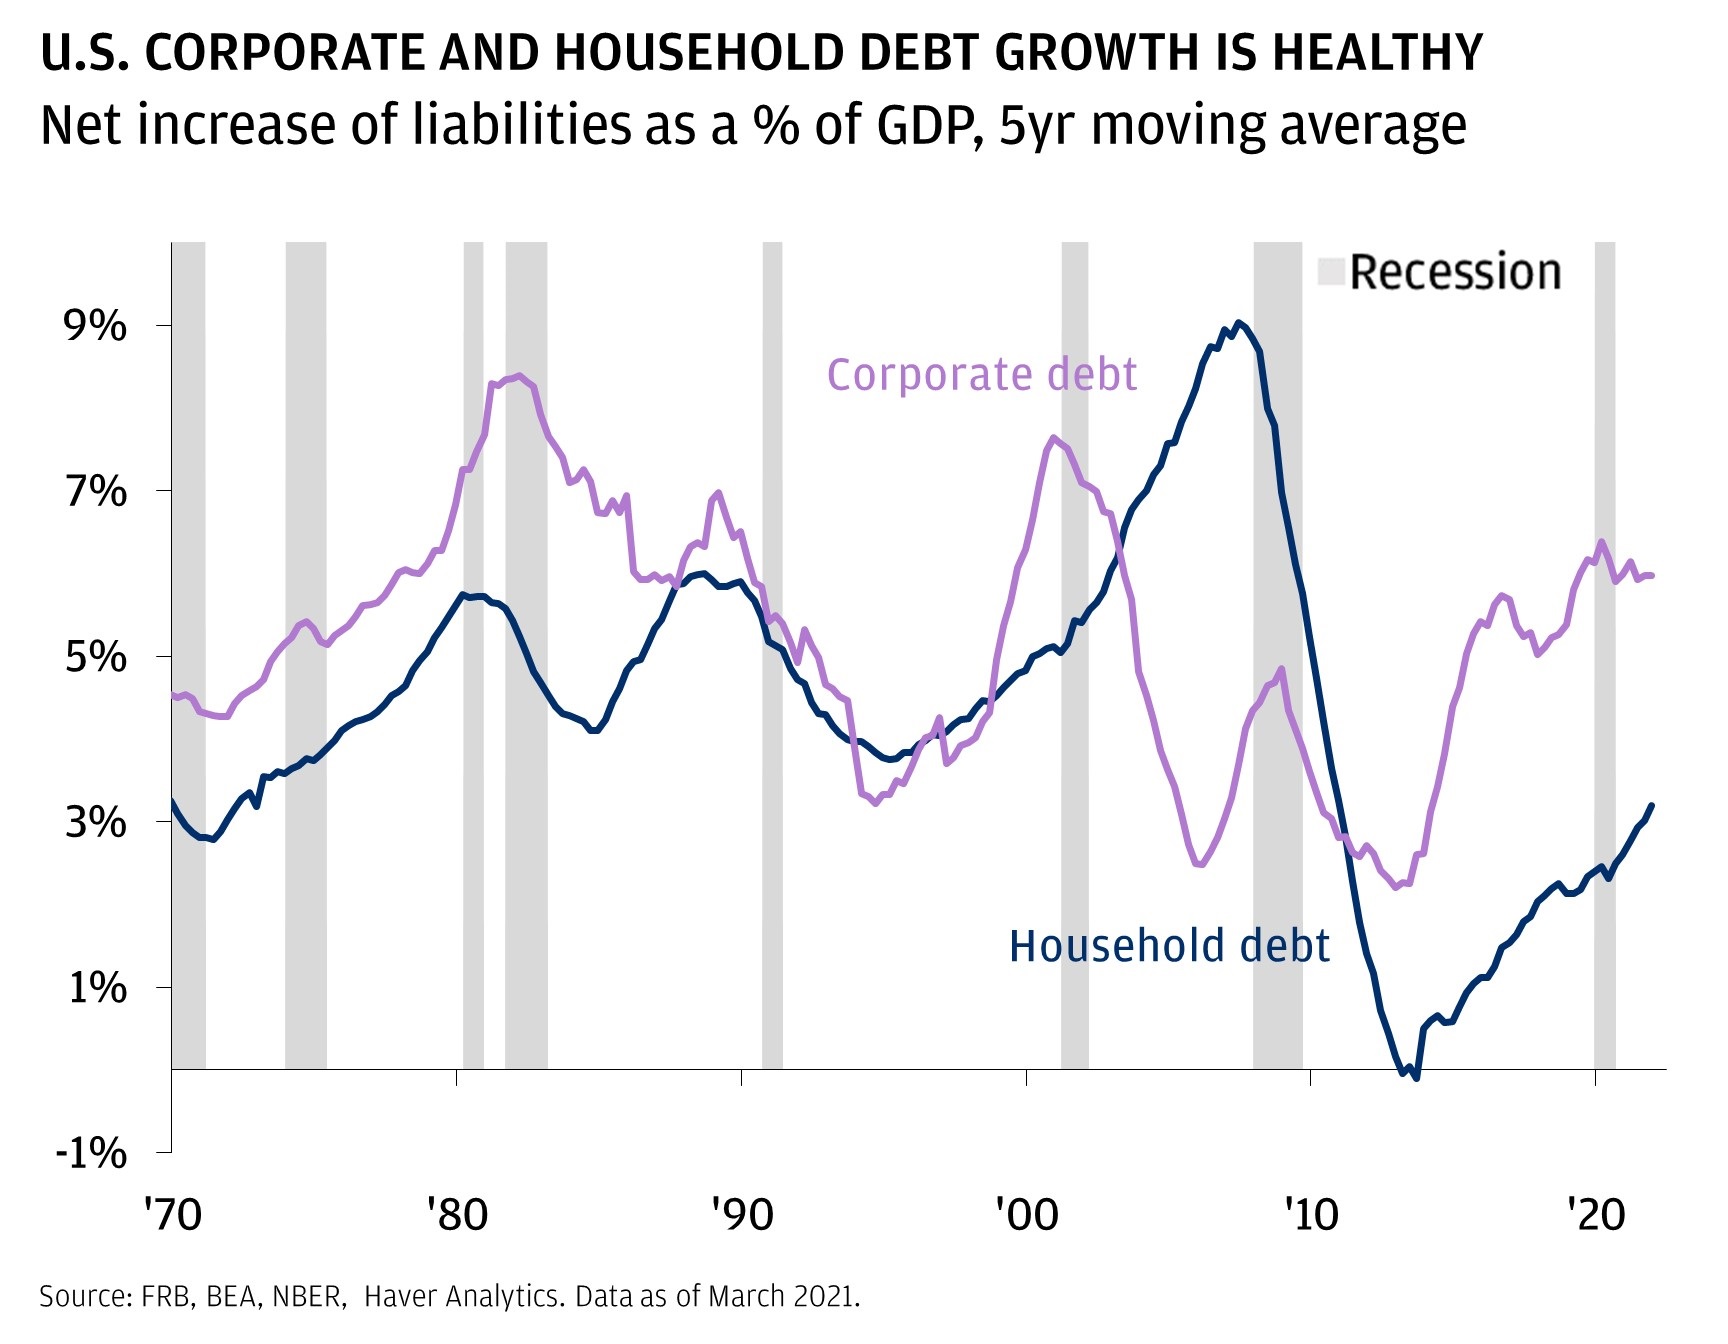 U.S. CORPORATE AND HOUSEHOLD NET DEBT GROWTH IS HEALTHY